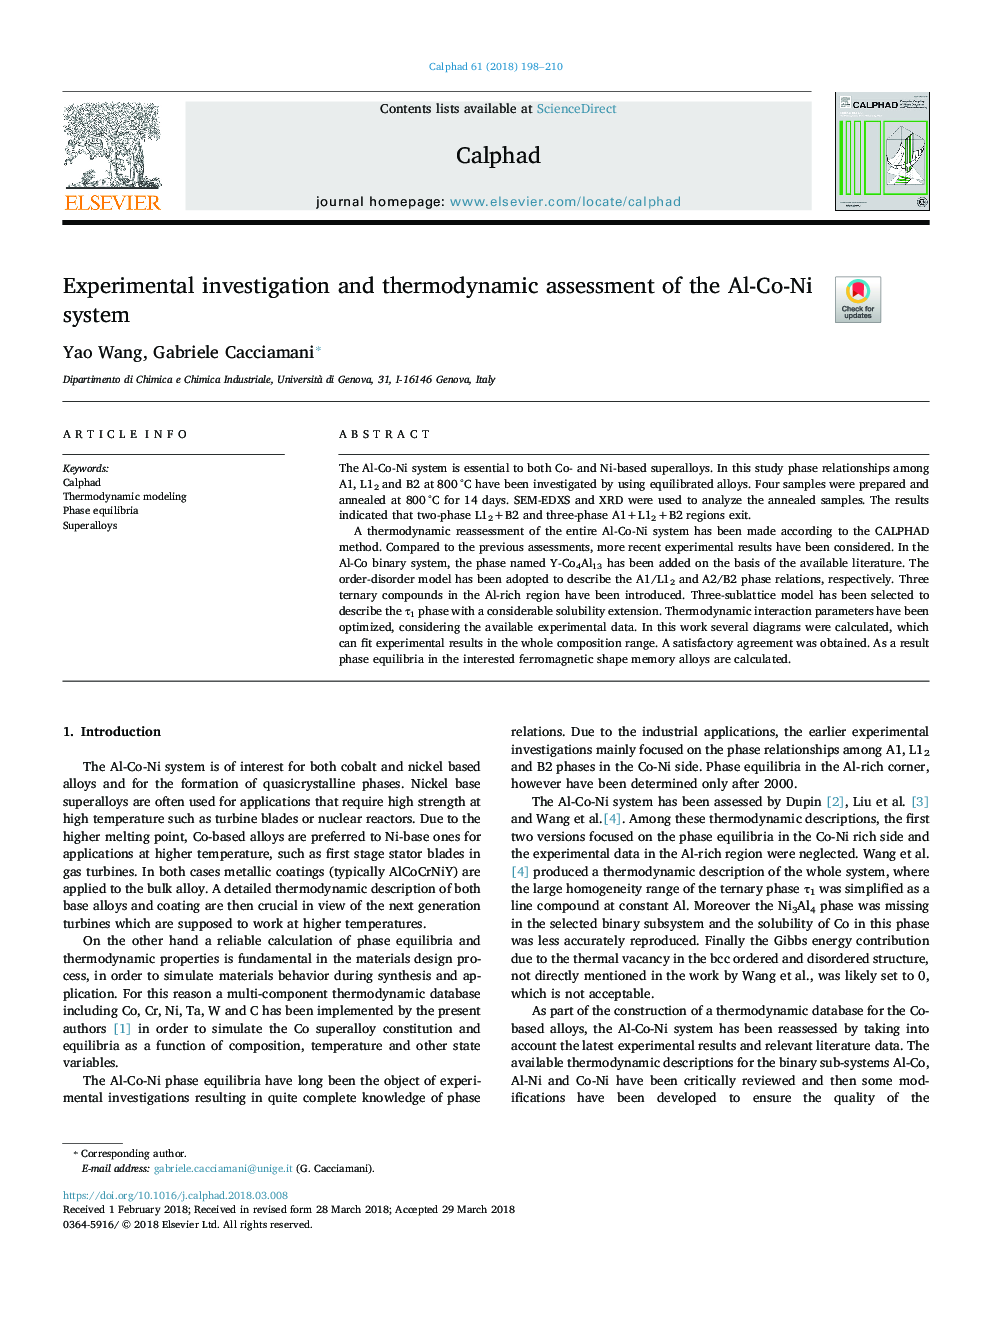 Experimental investigation and thermodynamic assessment of the Al-Co-Ni system